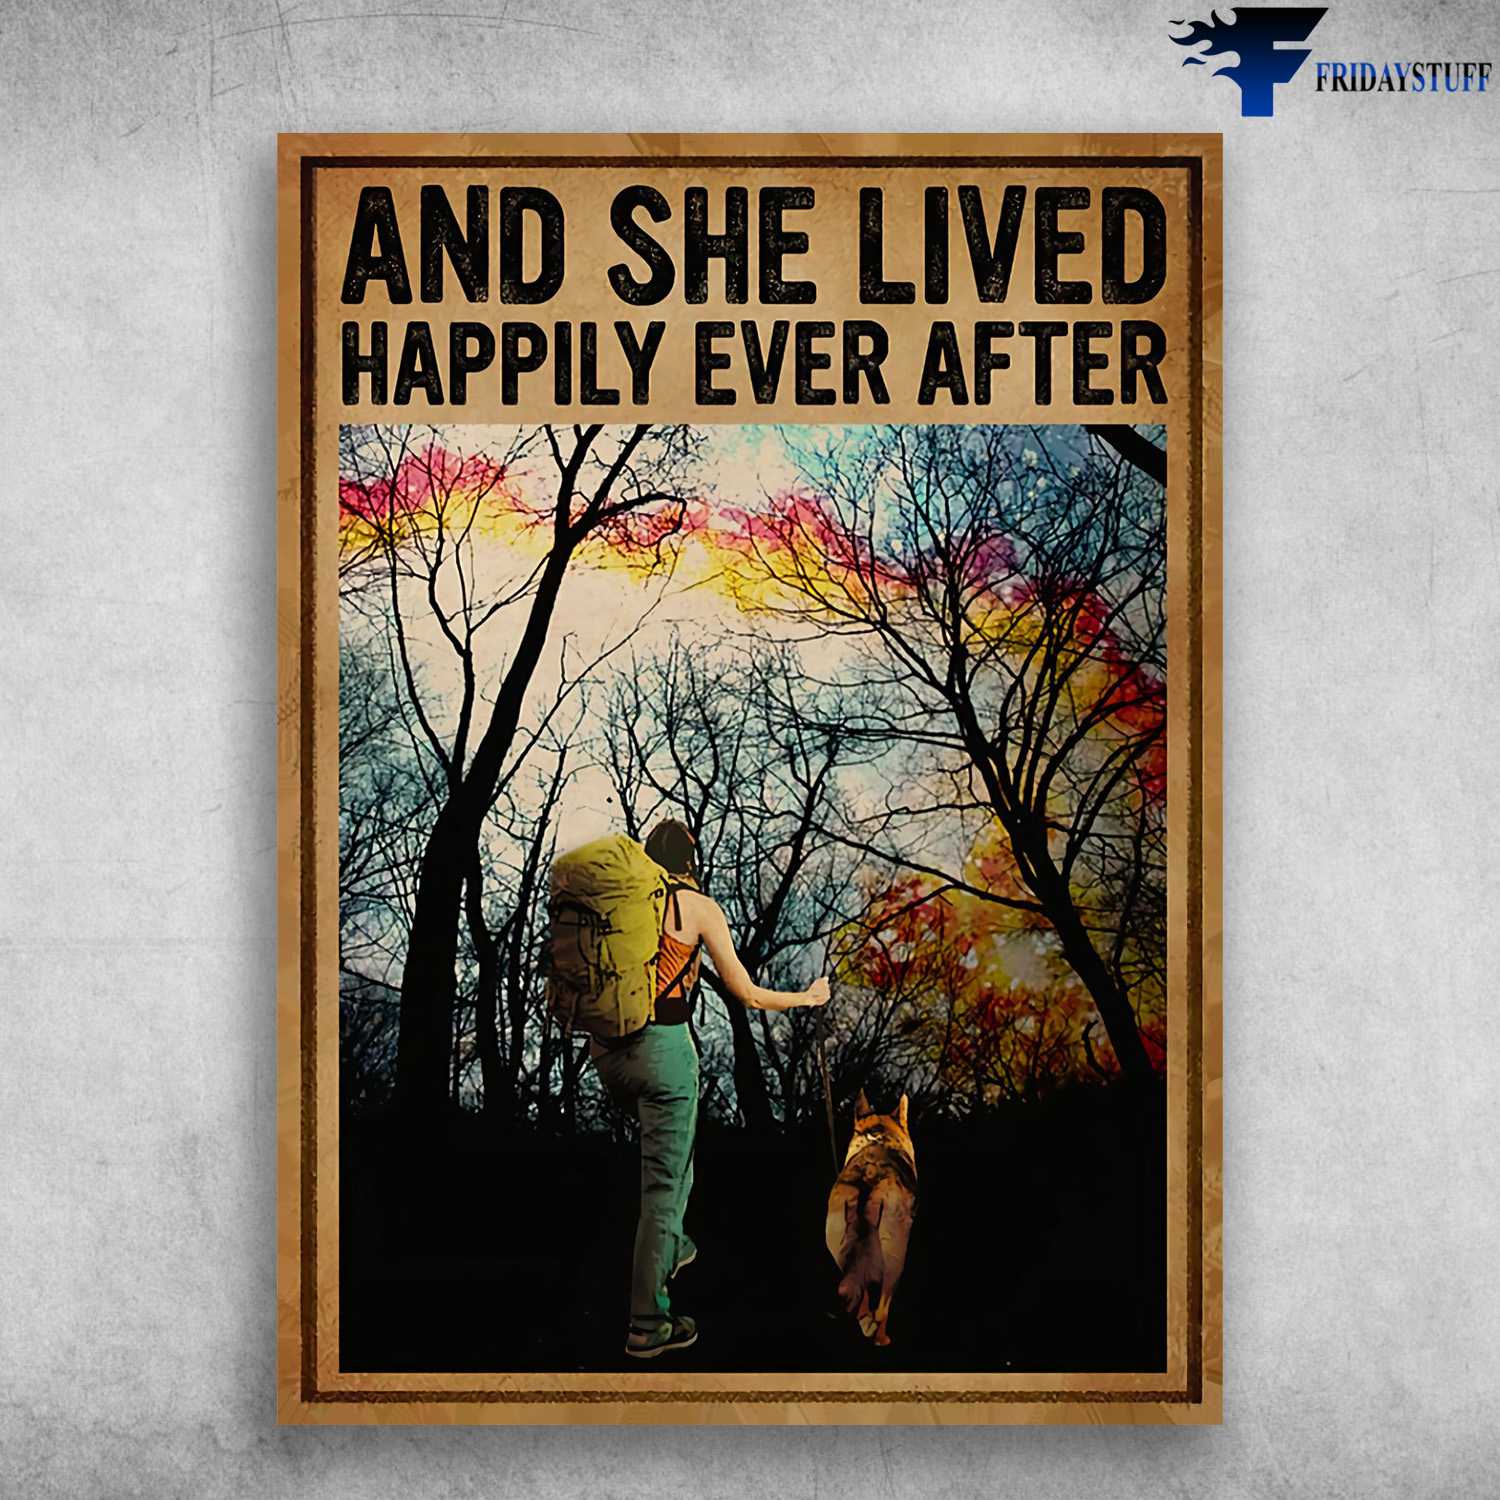 Hiking Poster, Hiking With Dog - And She Lived, Happily Ever After